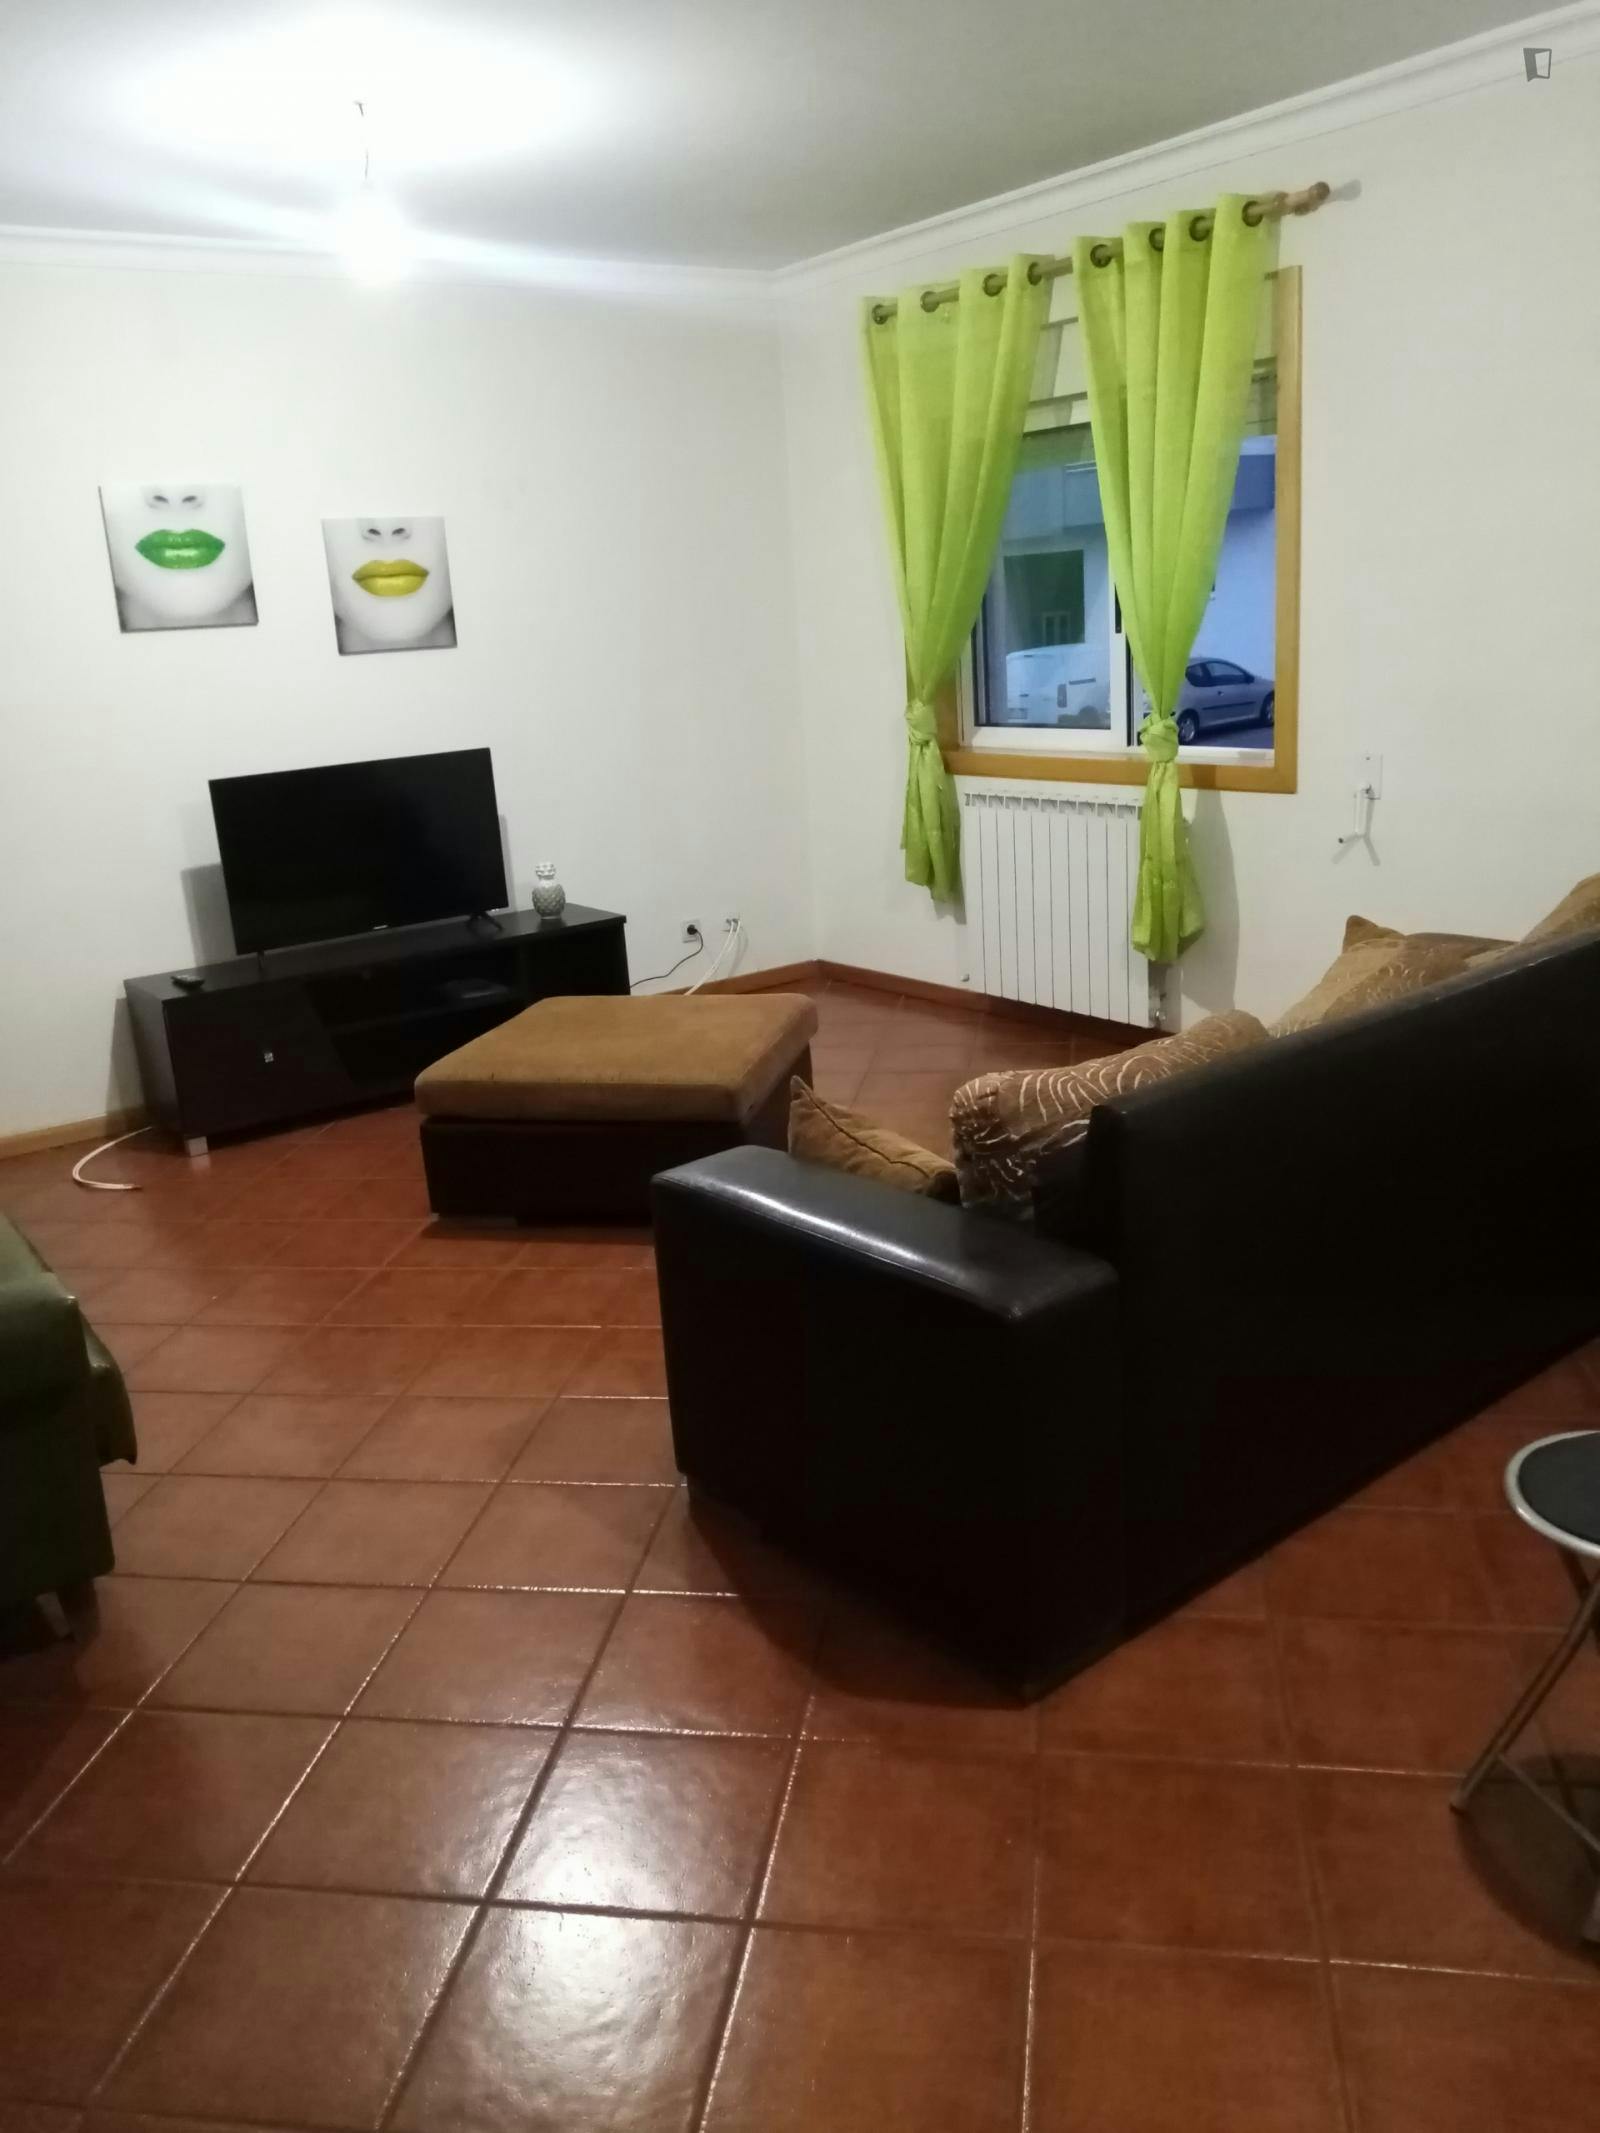 Welcoming 2-bedroom apartment near the centre of Bragança